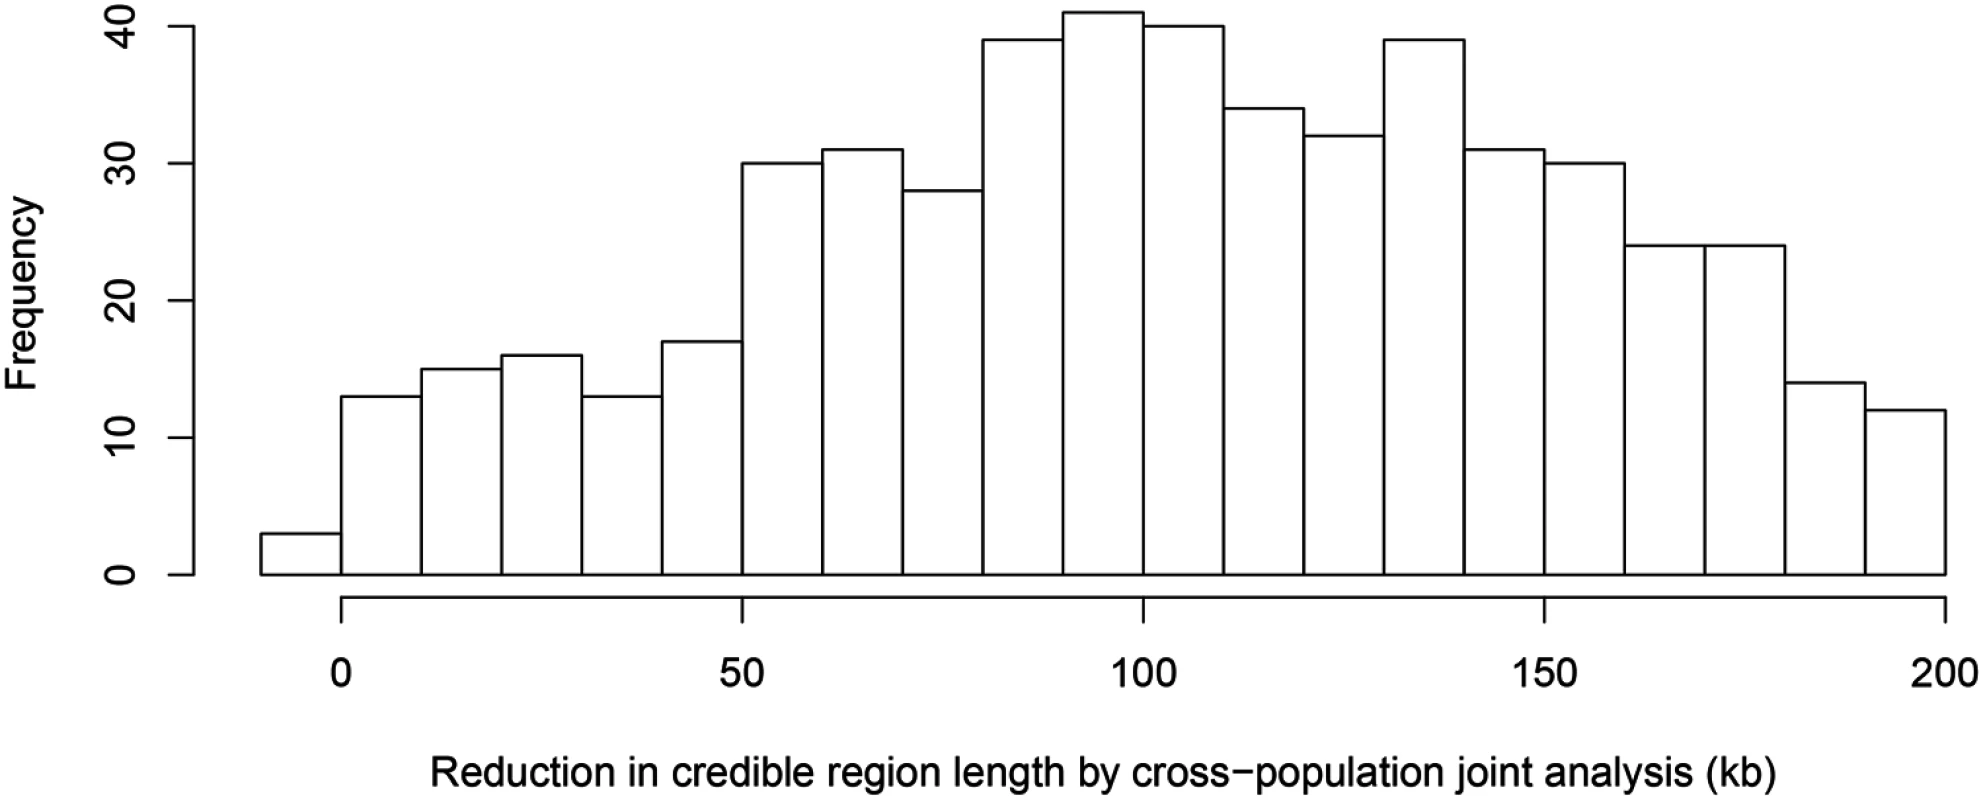 Histogram of reduction in 95% credible region length by cross-population joint analysis.